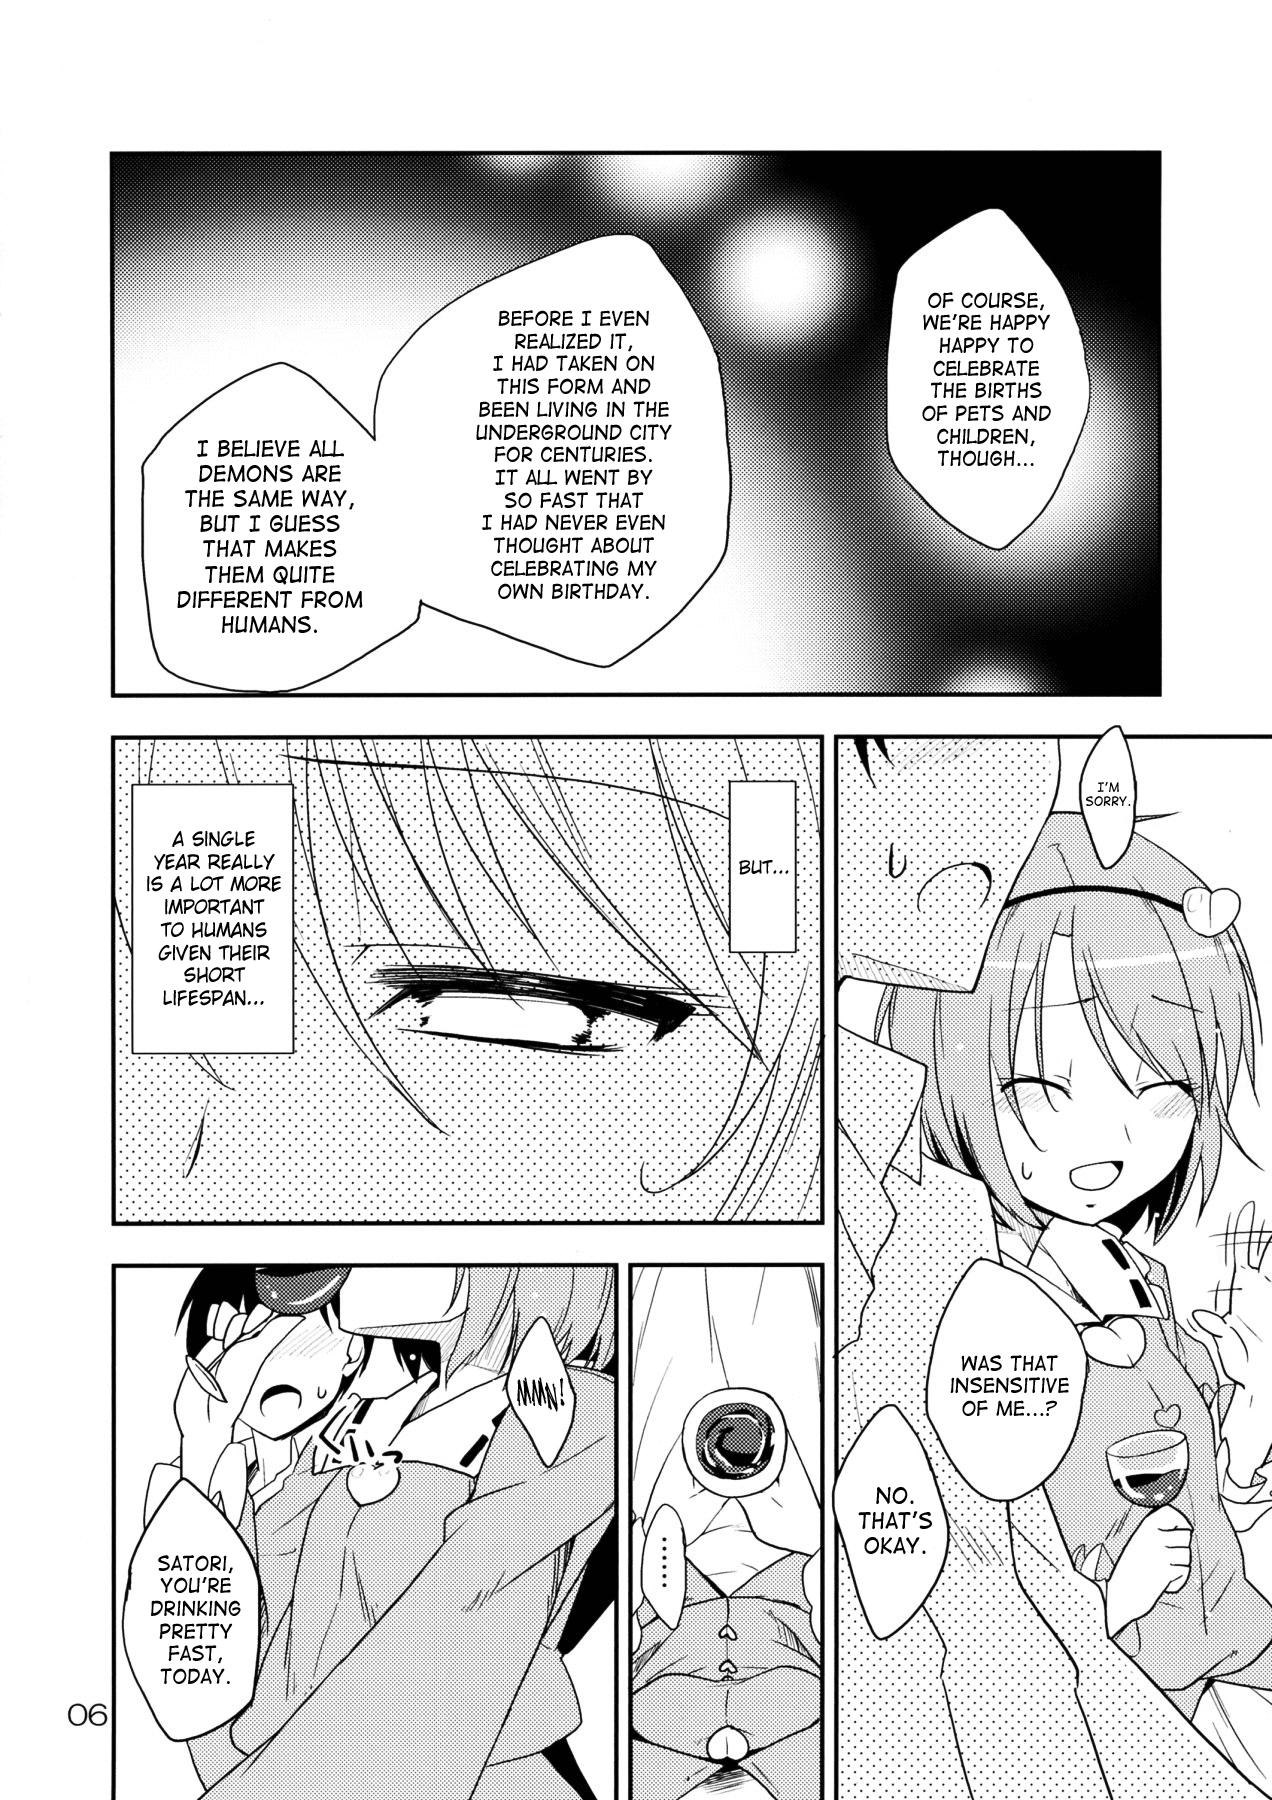 4some Urakoi Vol. 4 - Touhou project Rough Sex - Page 6